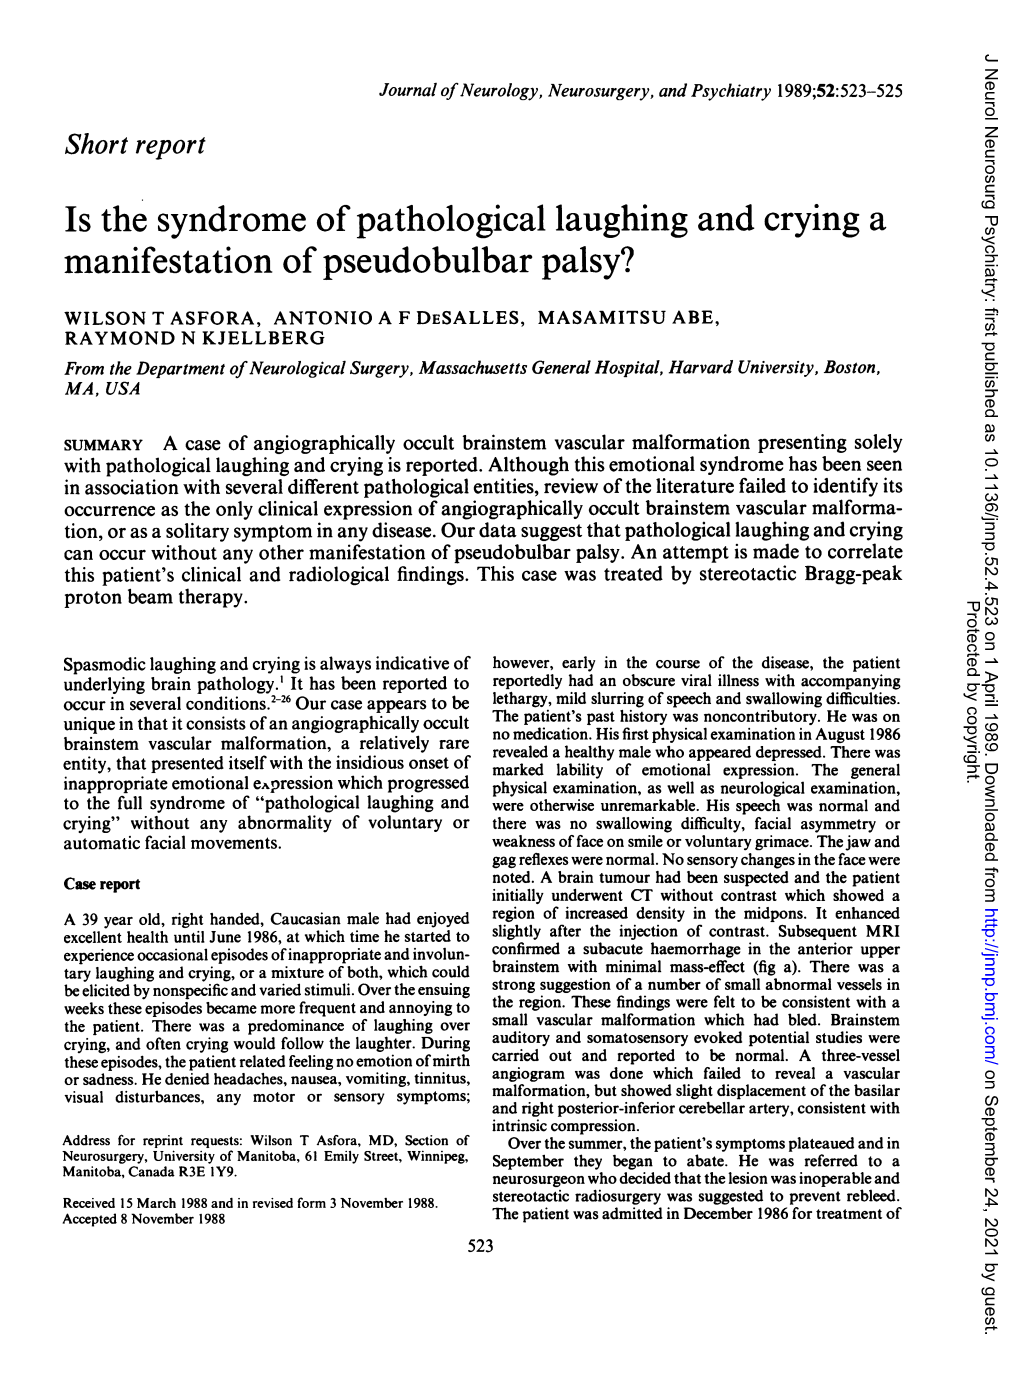 Is the Syndrome of Pathological Laughing and Crying a Manifestation of Pseudobulbar Palsy?